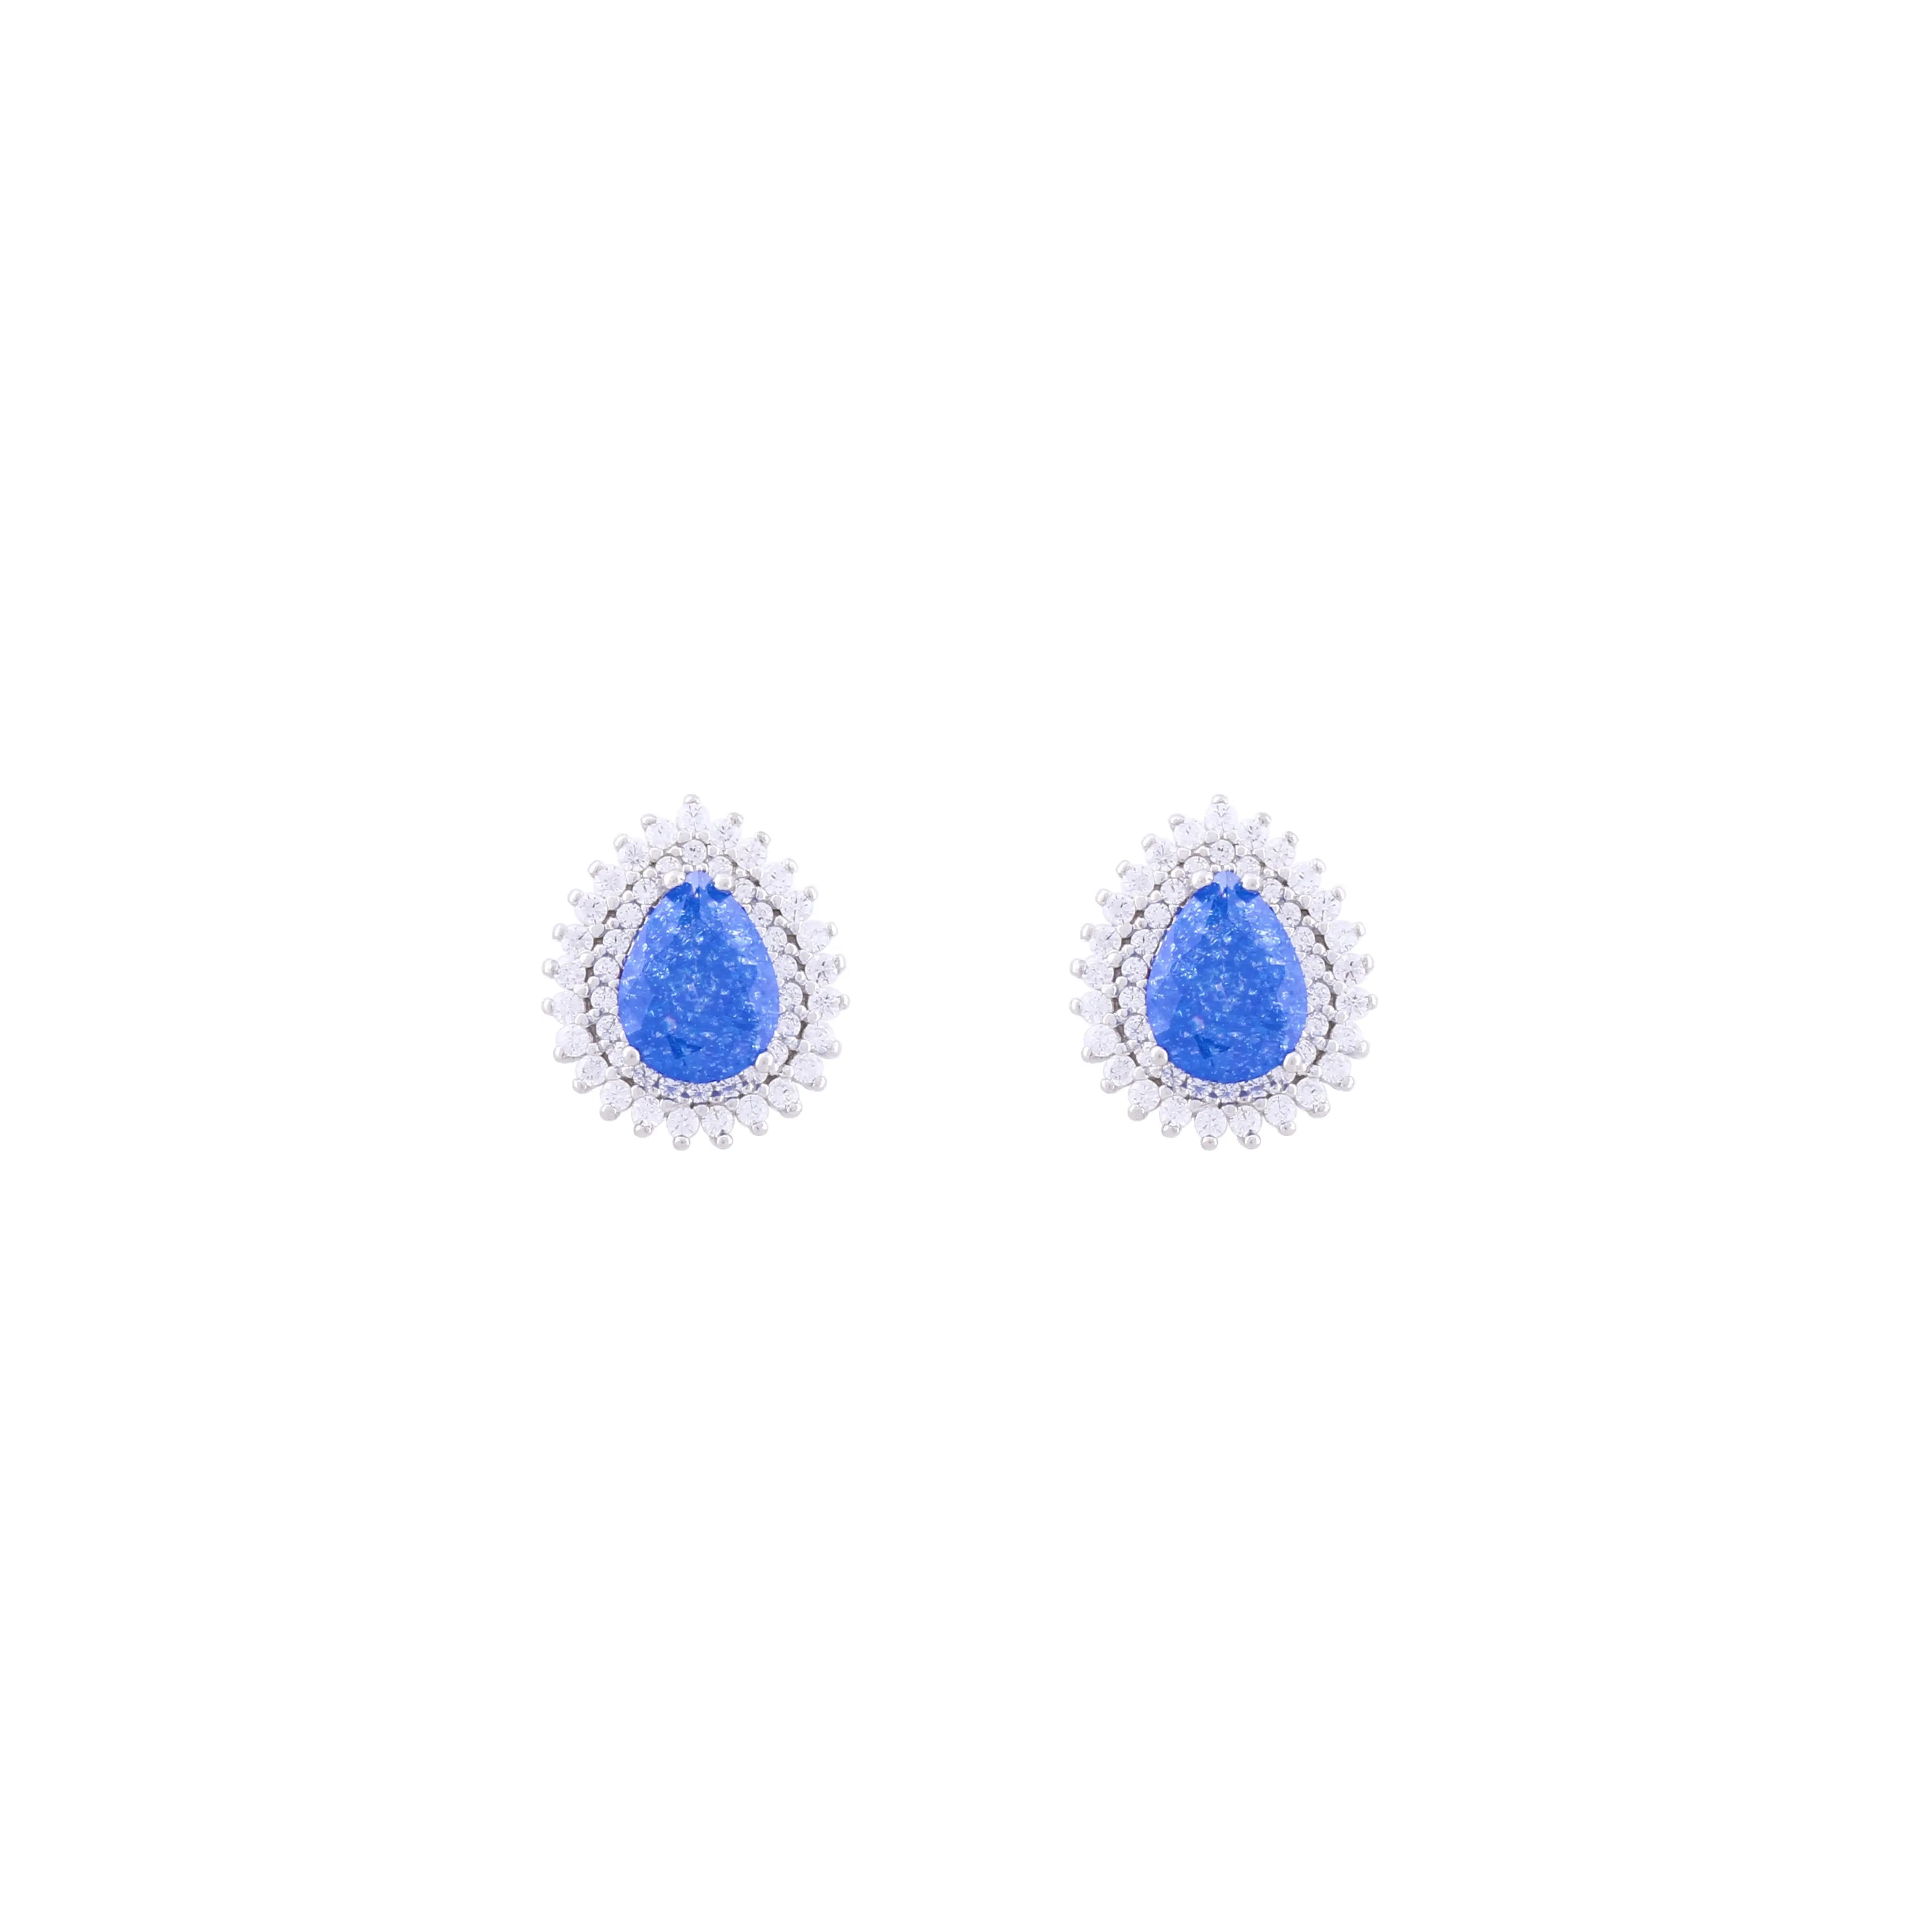 Asfour Stud Earrings made of 925 sterling silver, with a pear design, inlaid with a Blue zircon Stone and decorated with zircon Stones